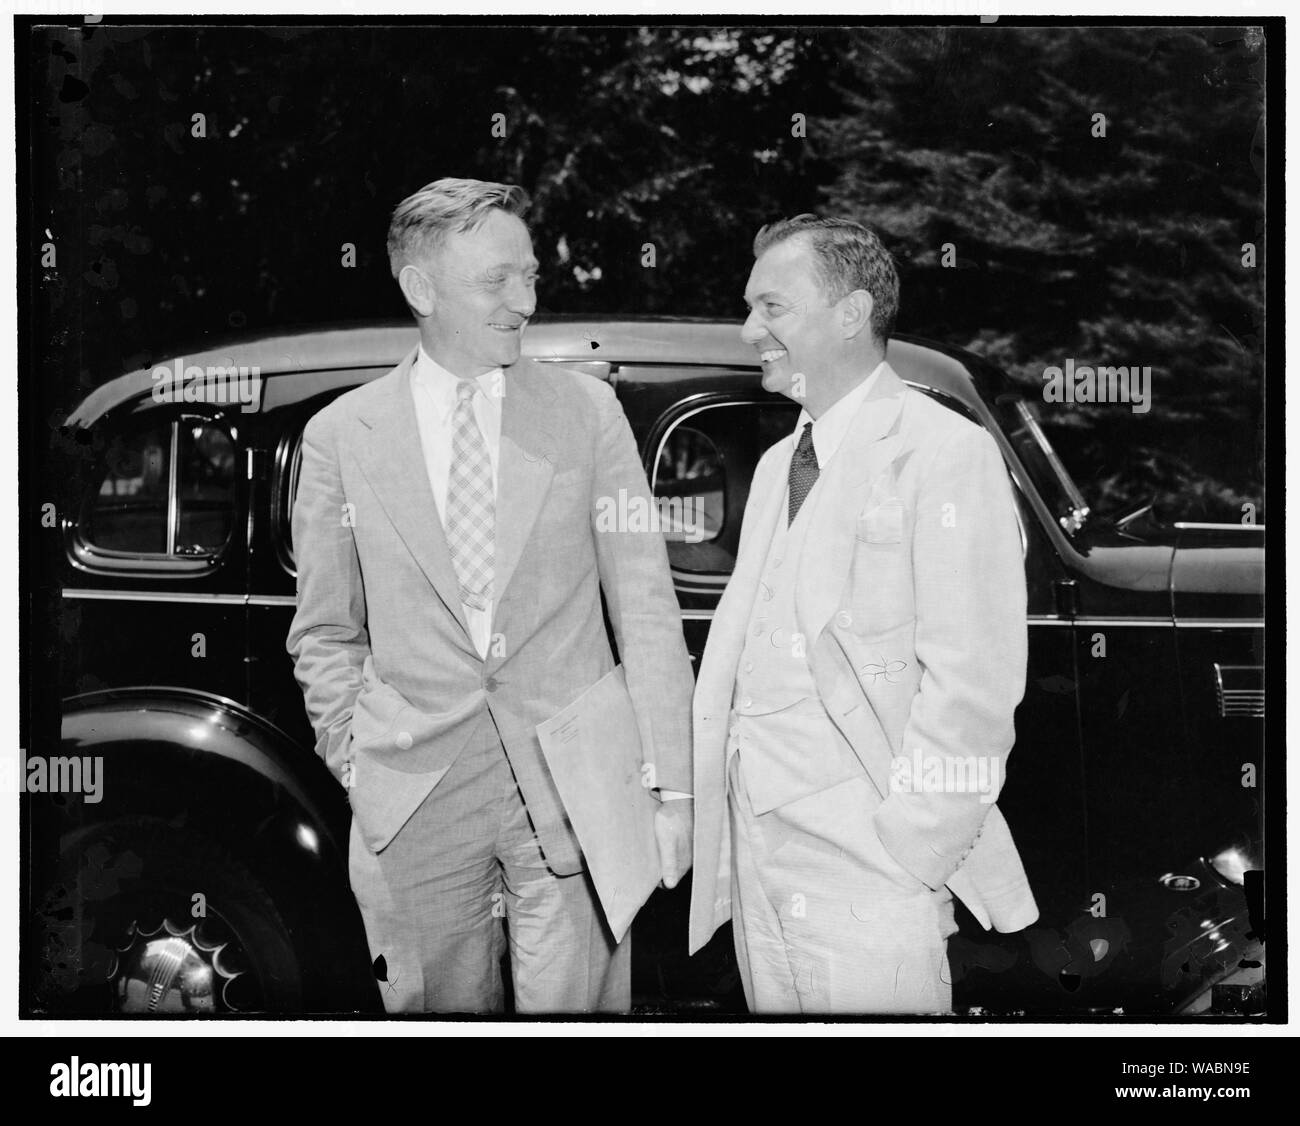 Confer with President on anti-trust matters. Washington, D.C., June 24. William O. Douglas, Chairman of the Securities and Exchange Commission. Left; and Robert Jackson, Solicitor General, photographed after leaving the White House today where they conferred with the President on anti-trust matters, preliminary to the government inquiry into monopolistic business practices, 6/24/38 Stock Photo